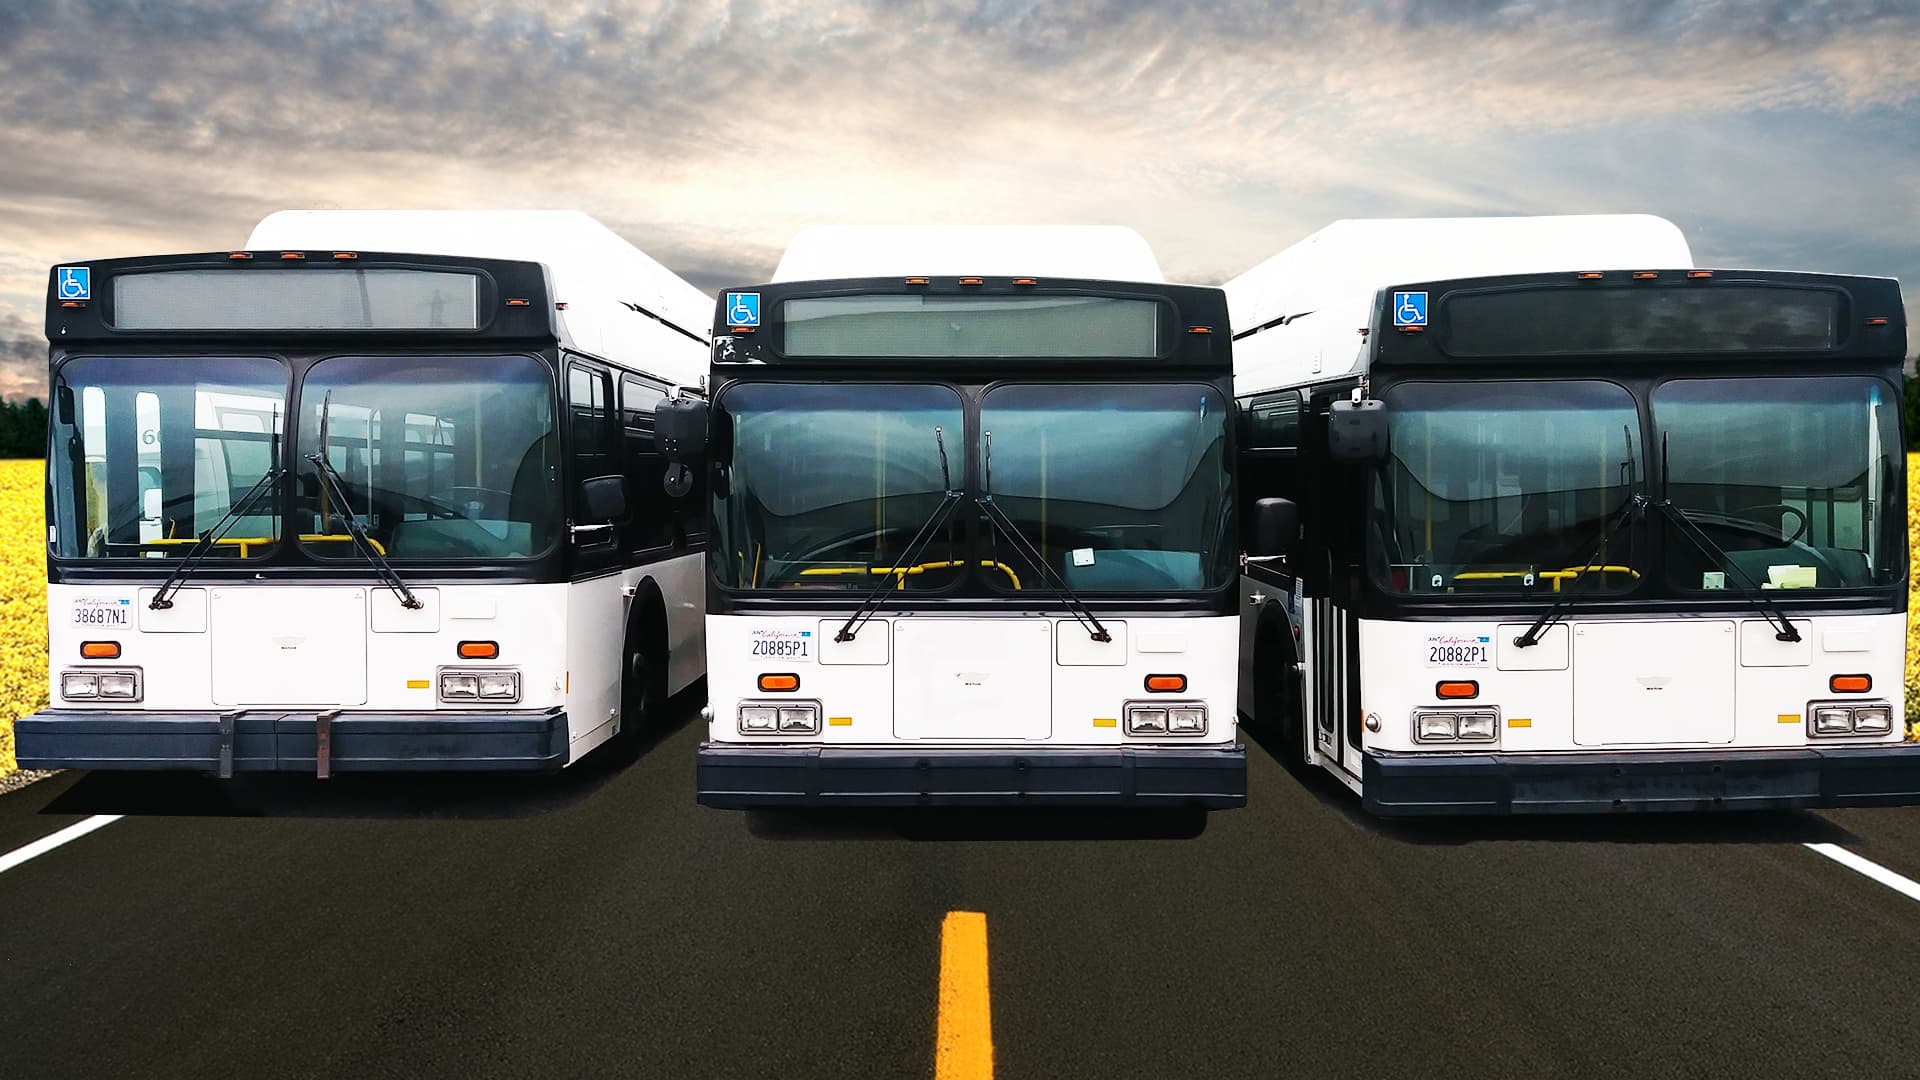 Three TourCoach Buses lined up on a highway